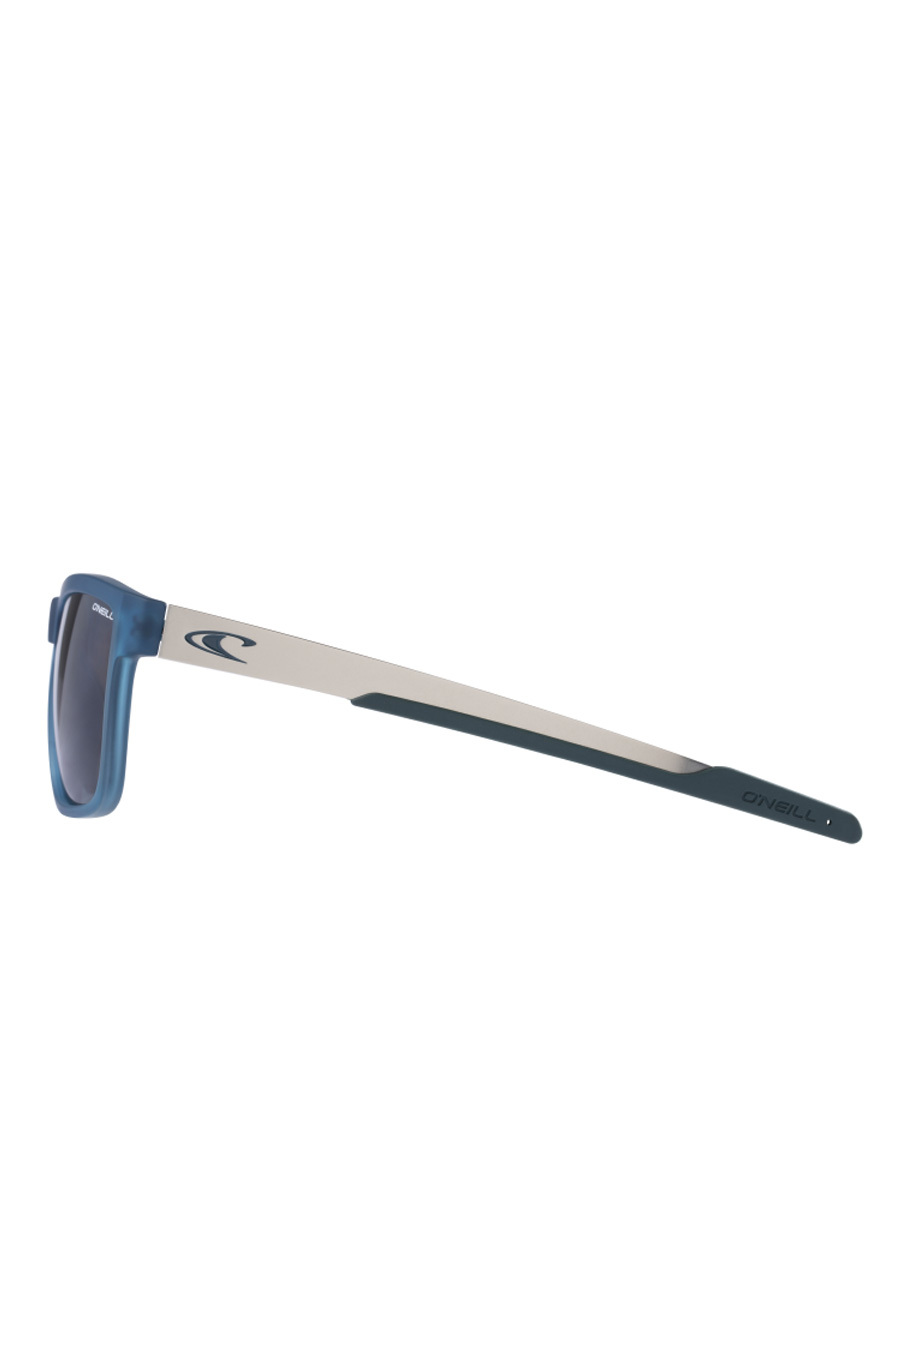 Saulesbrilles ONEILL ONS-9006-20-105P